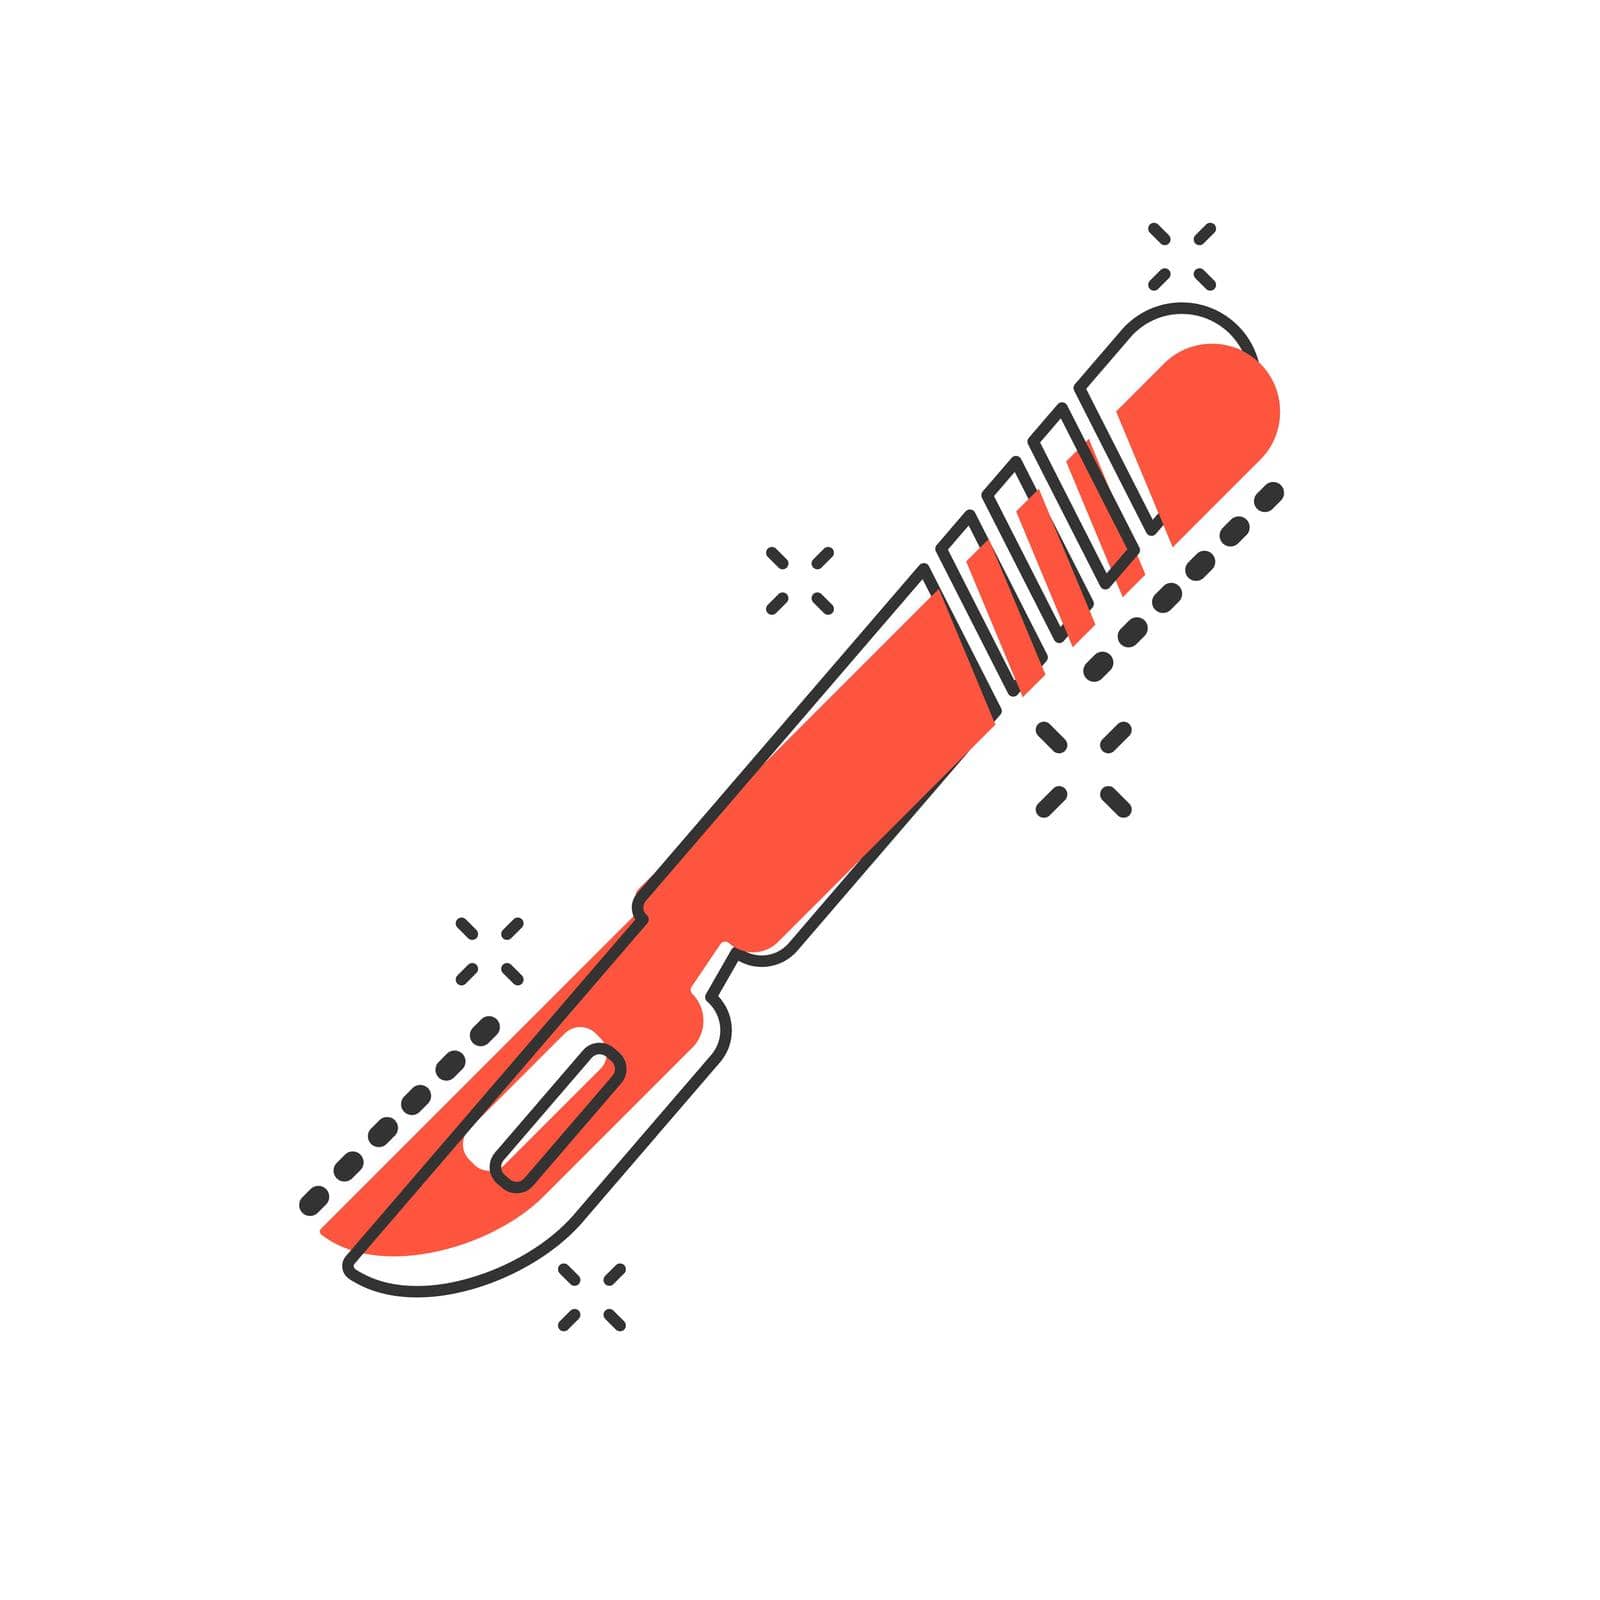 Vector cartoon medical scalpel icon in comic style. Hospital surgery knife sign illustration pictogram. Scalpel business splash effect concept.